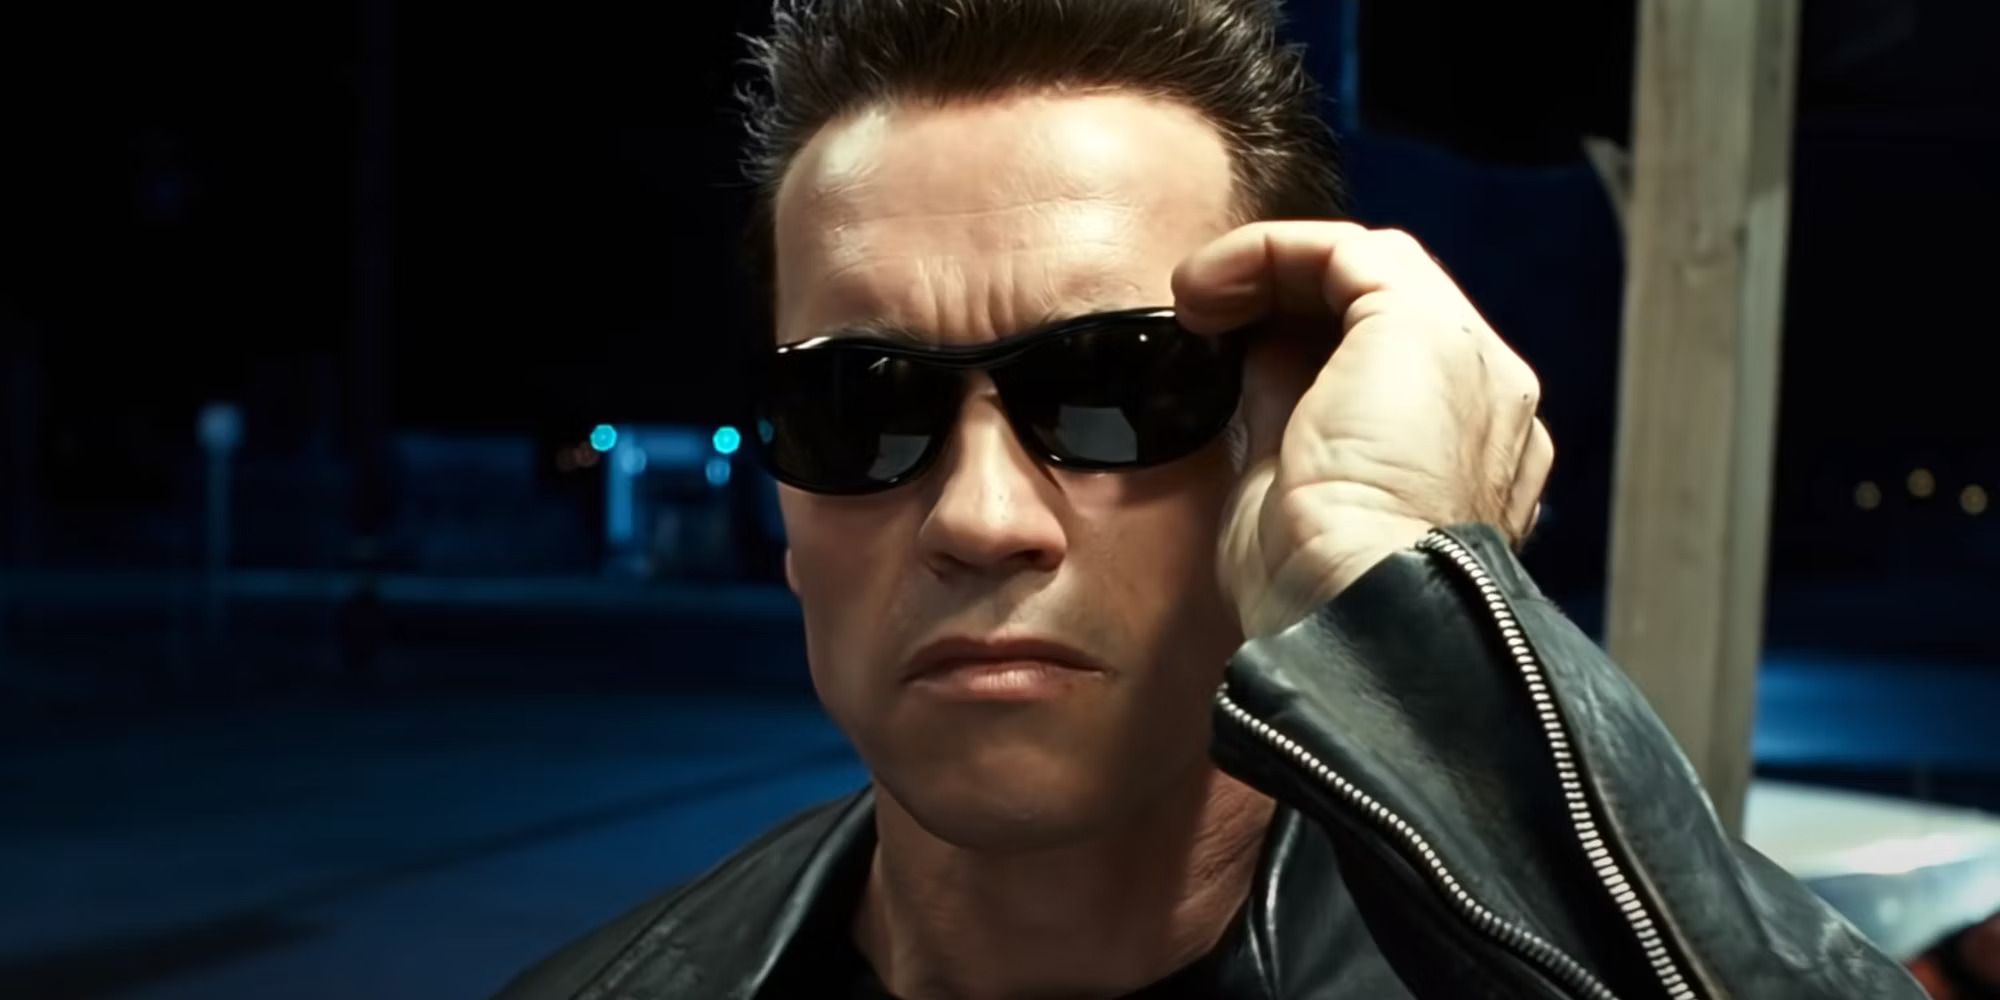 Arnold Schwarzenegger as the T-800 putting on sunglasses in 'Terminator 2: Judgement Day'